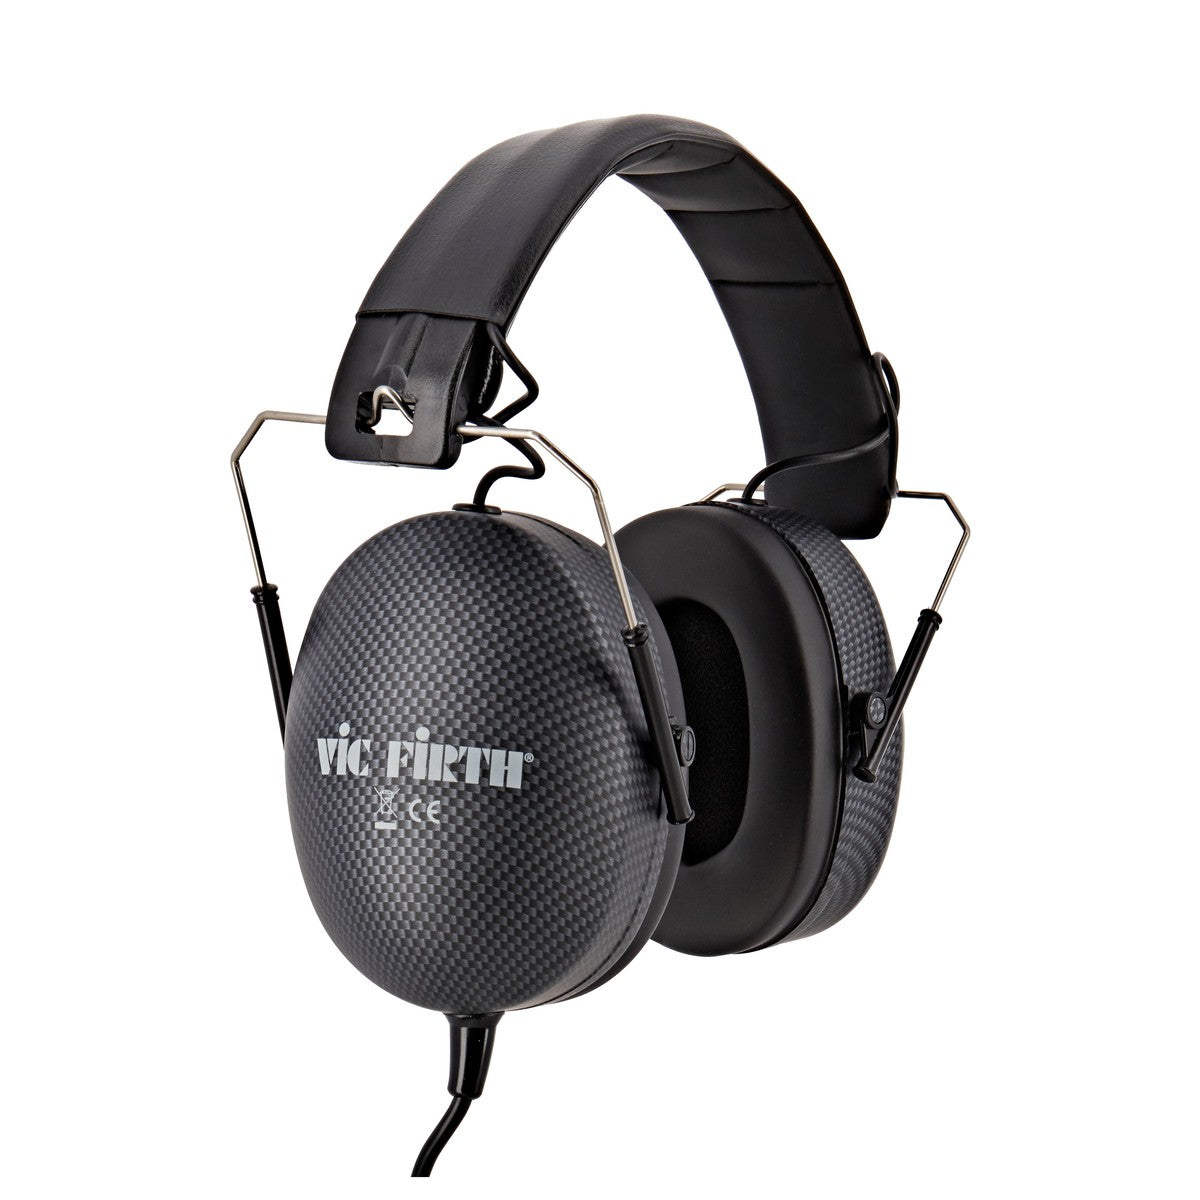 VIC FIRTH Stereo Isolation Headphones 2nd Gen.